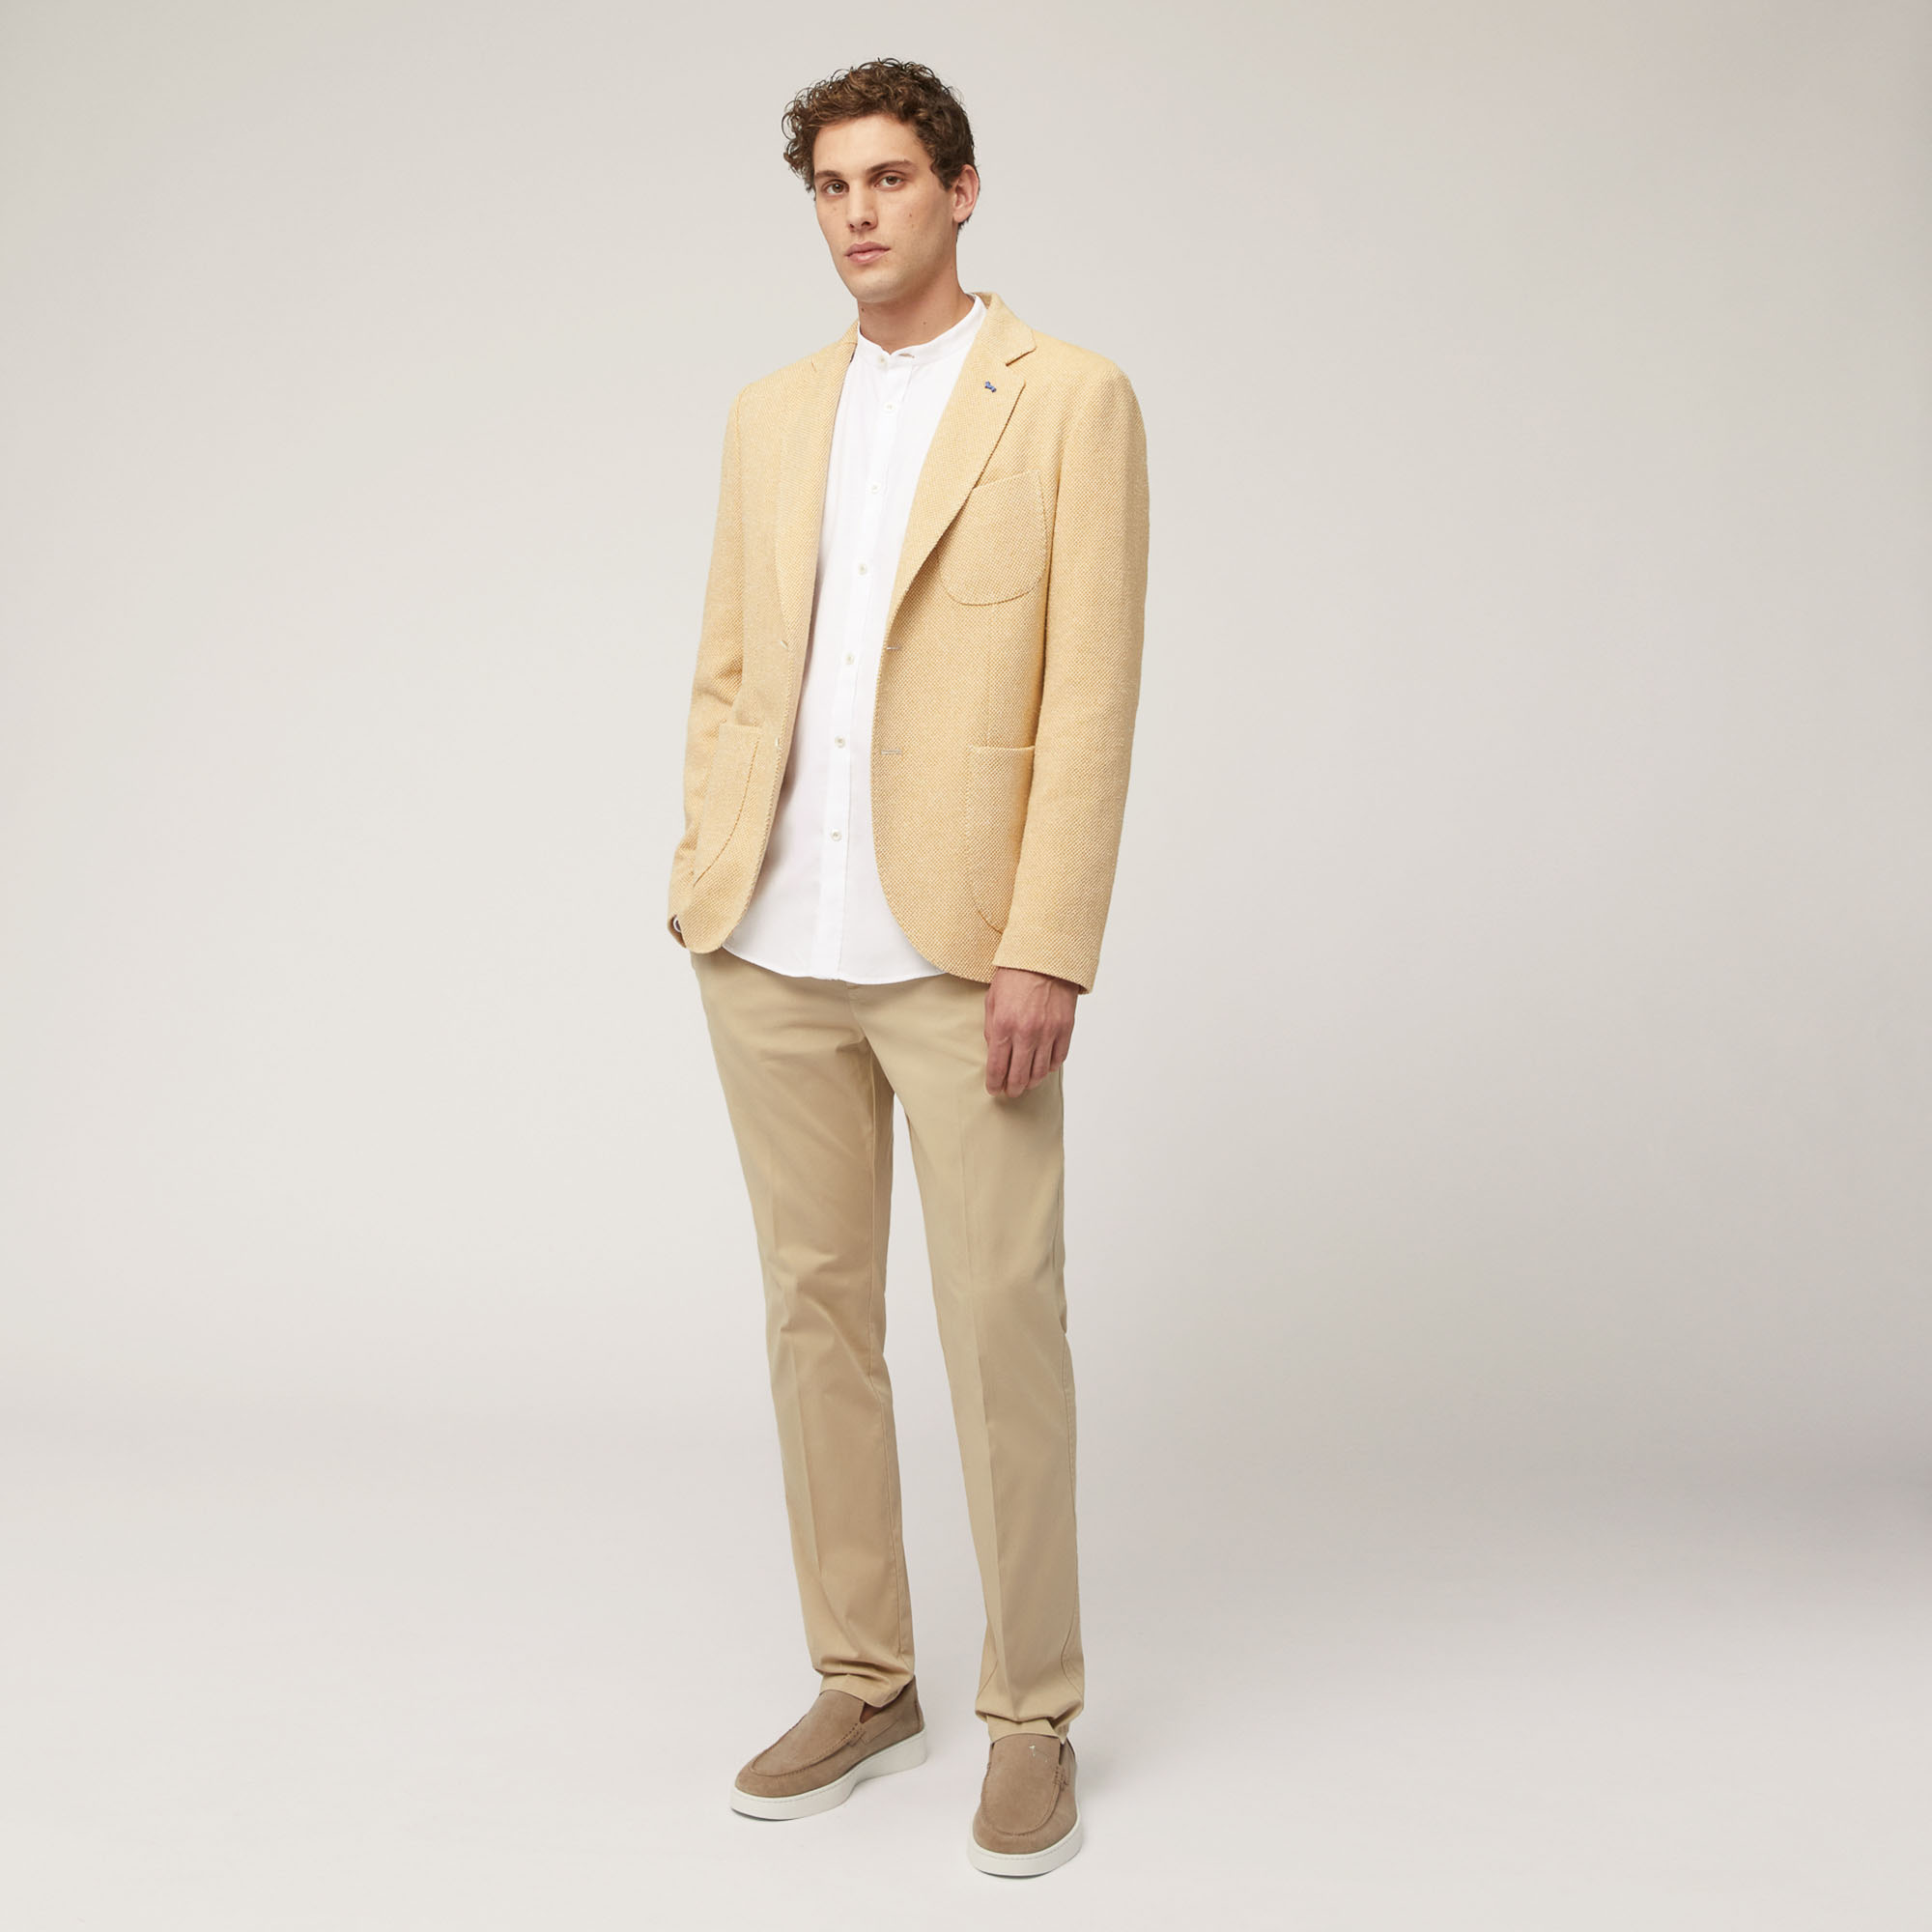 Cotton and Linen Jacket with Pockets and Breast Pocket, Gold, large image number 3